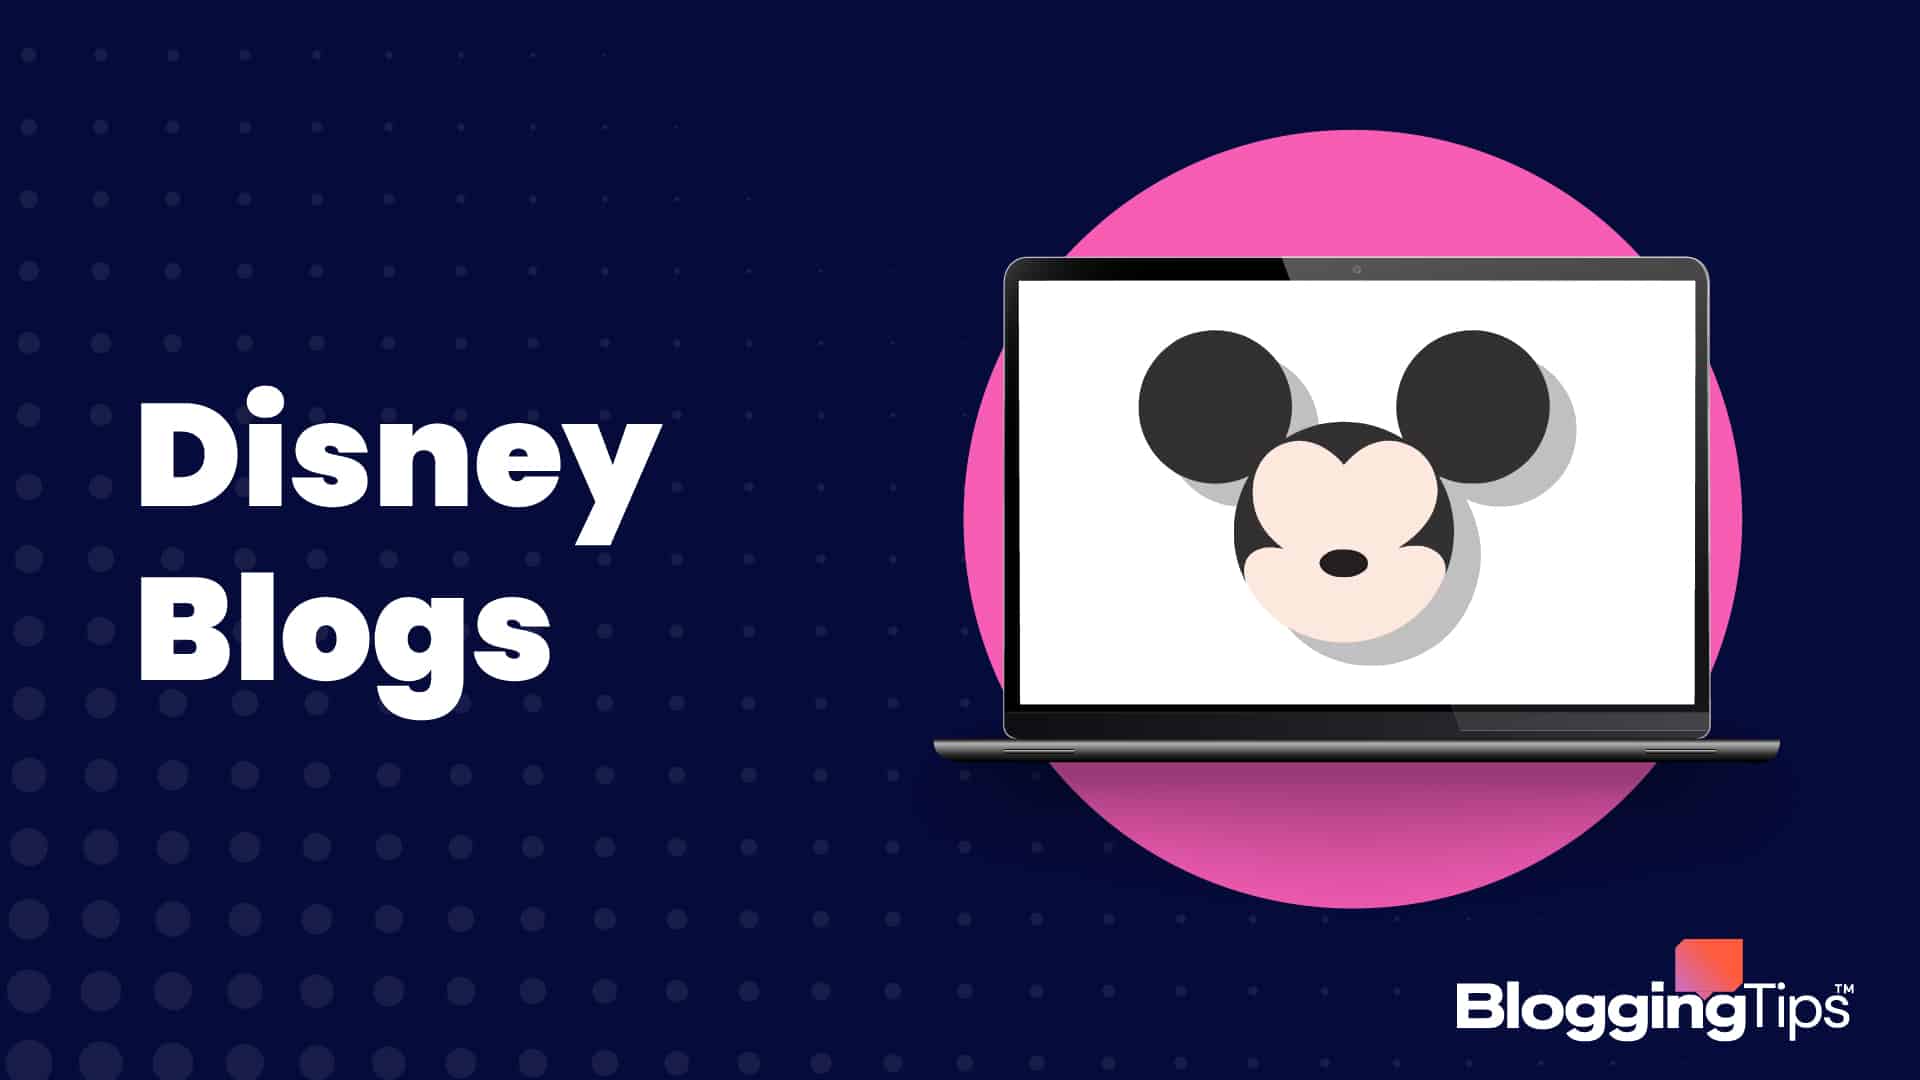 Disney Blogs Definition, Types, and 25 Examples